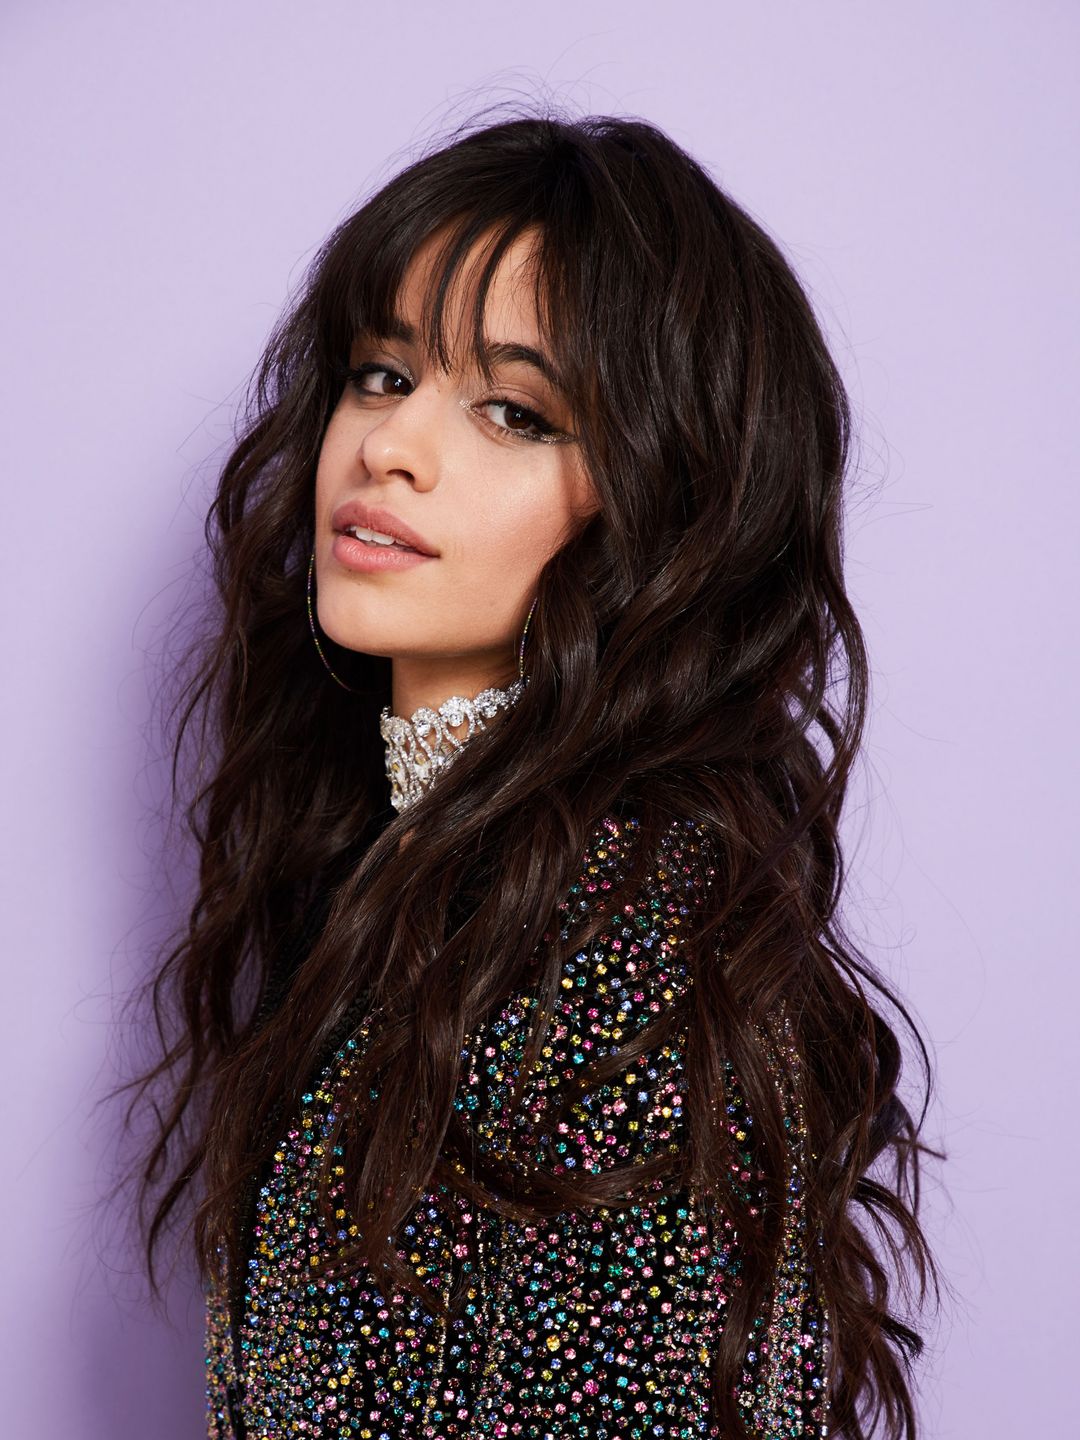 Camila Cabello does she have a husband